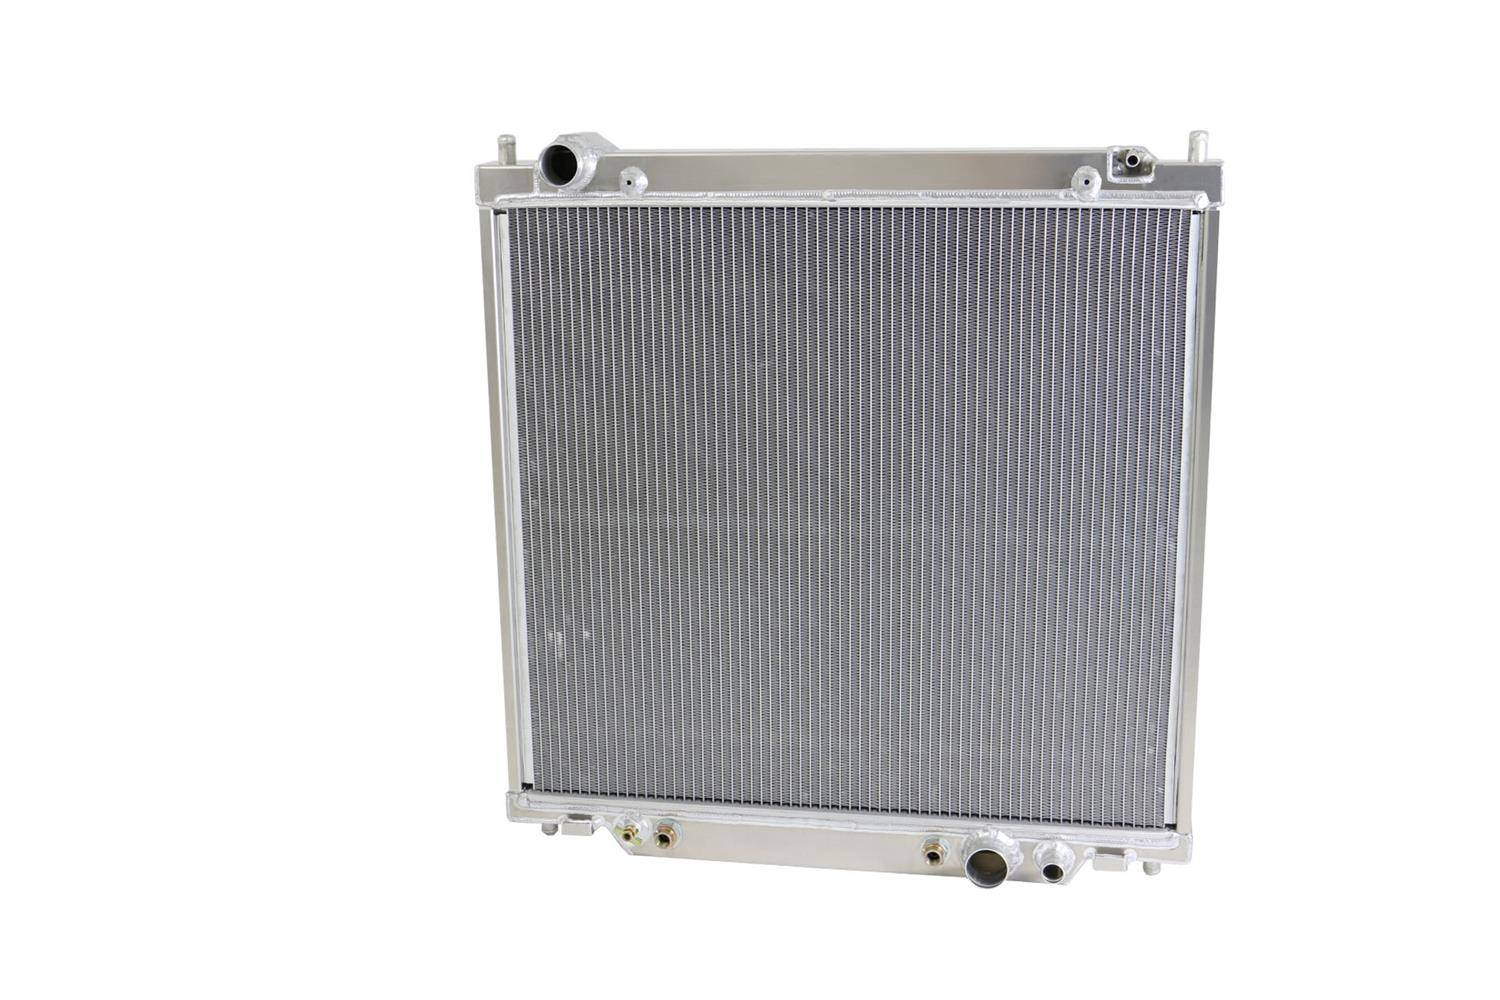 Wizard Cooling Inc - Wizard Cooling - 1999-2005 FORD F-250, F-350, F-450, F-550, Excursion (6.8L & 7.3L) Radiator Only - 2171-210